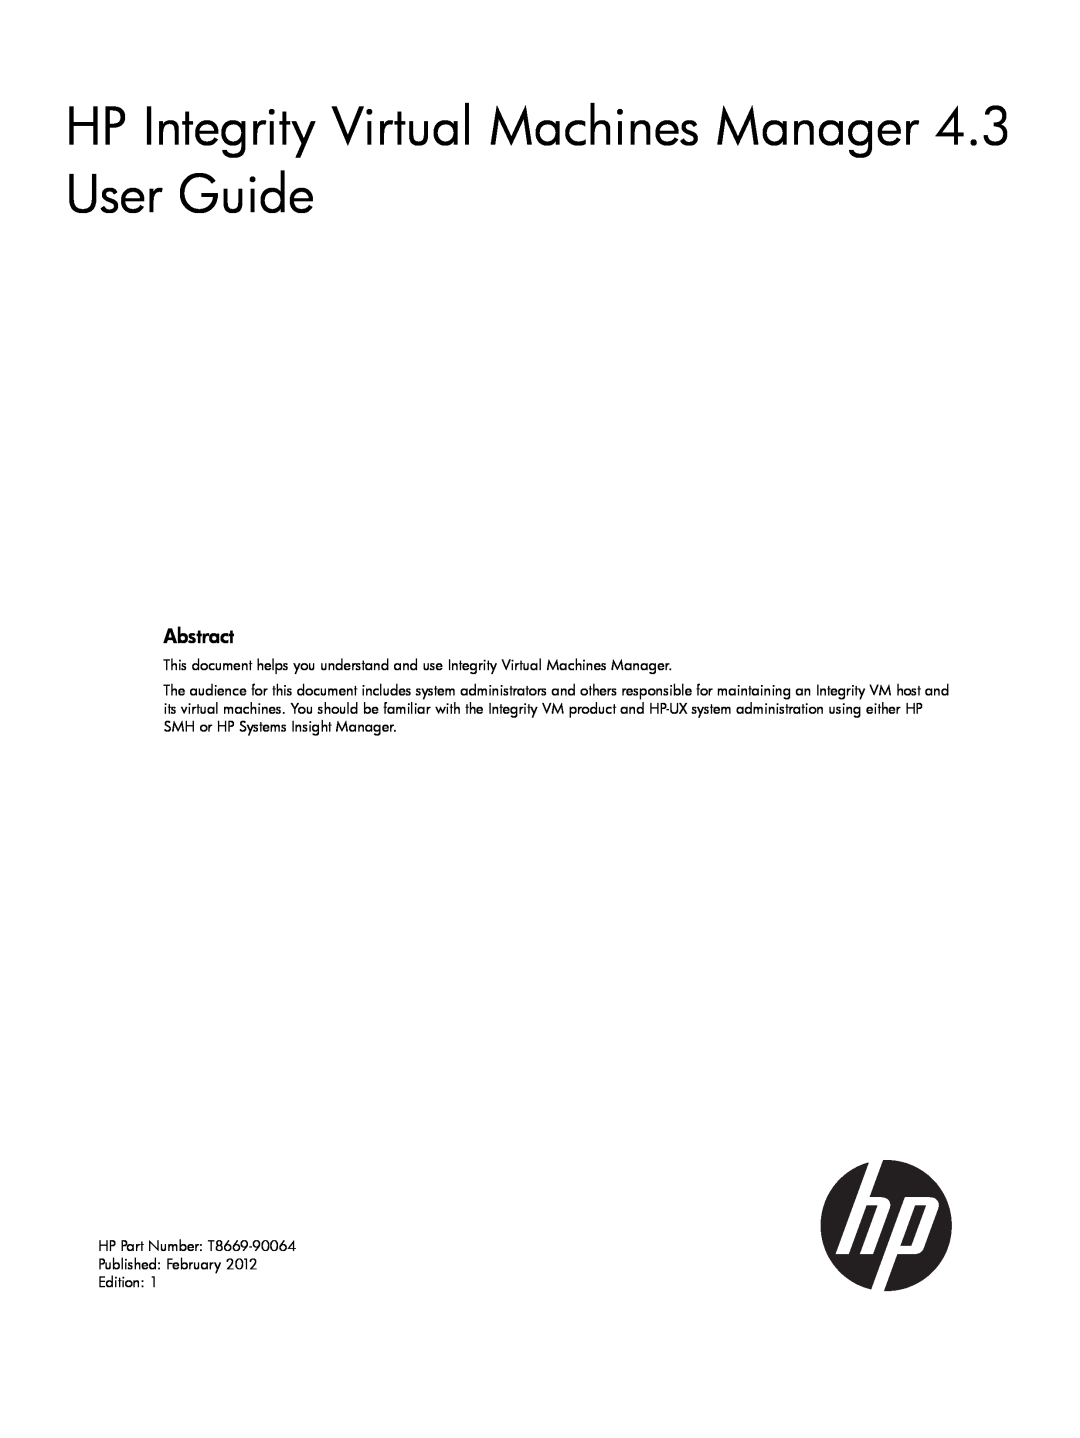 HP UX vPars and Integrity VM v6 manual HP Integrity Virtual Machines Manager 4.3 User Guide, Abstract 